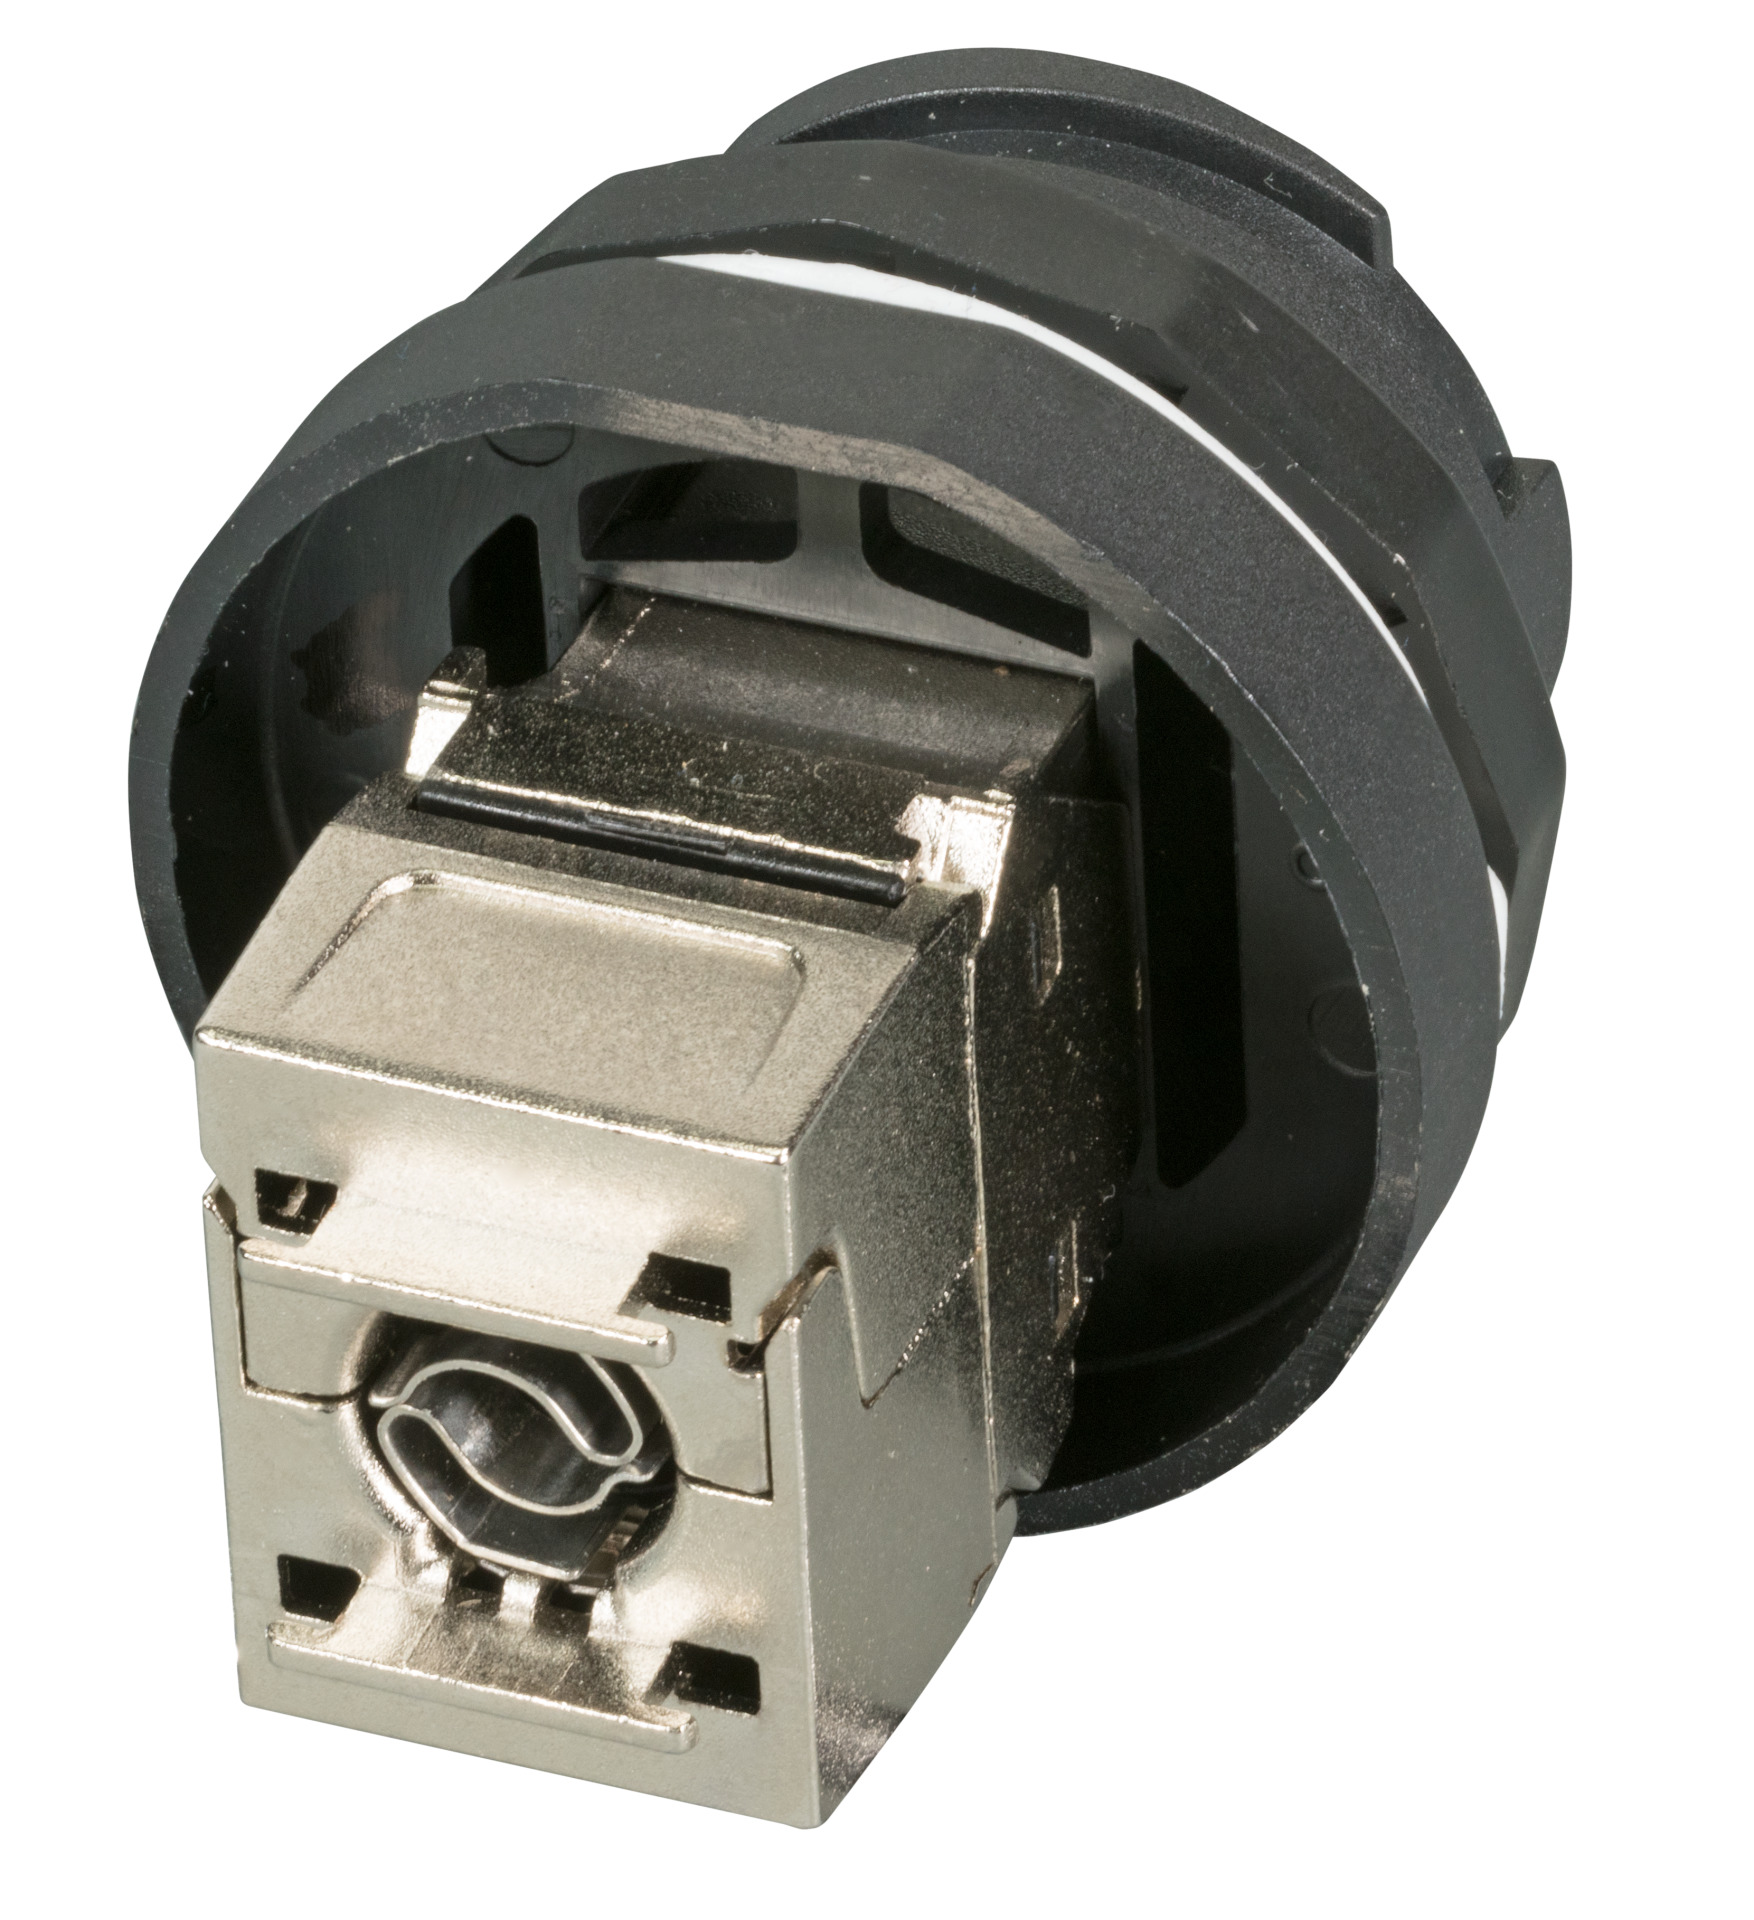 IP68 Receptacle for keystone modules and adapters, Bayonet locking